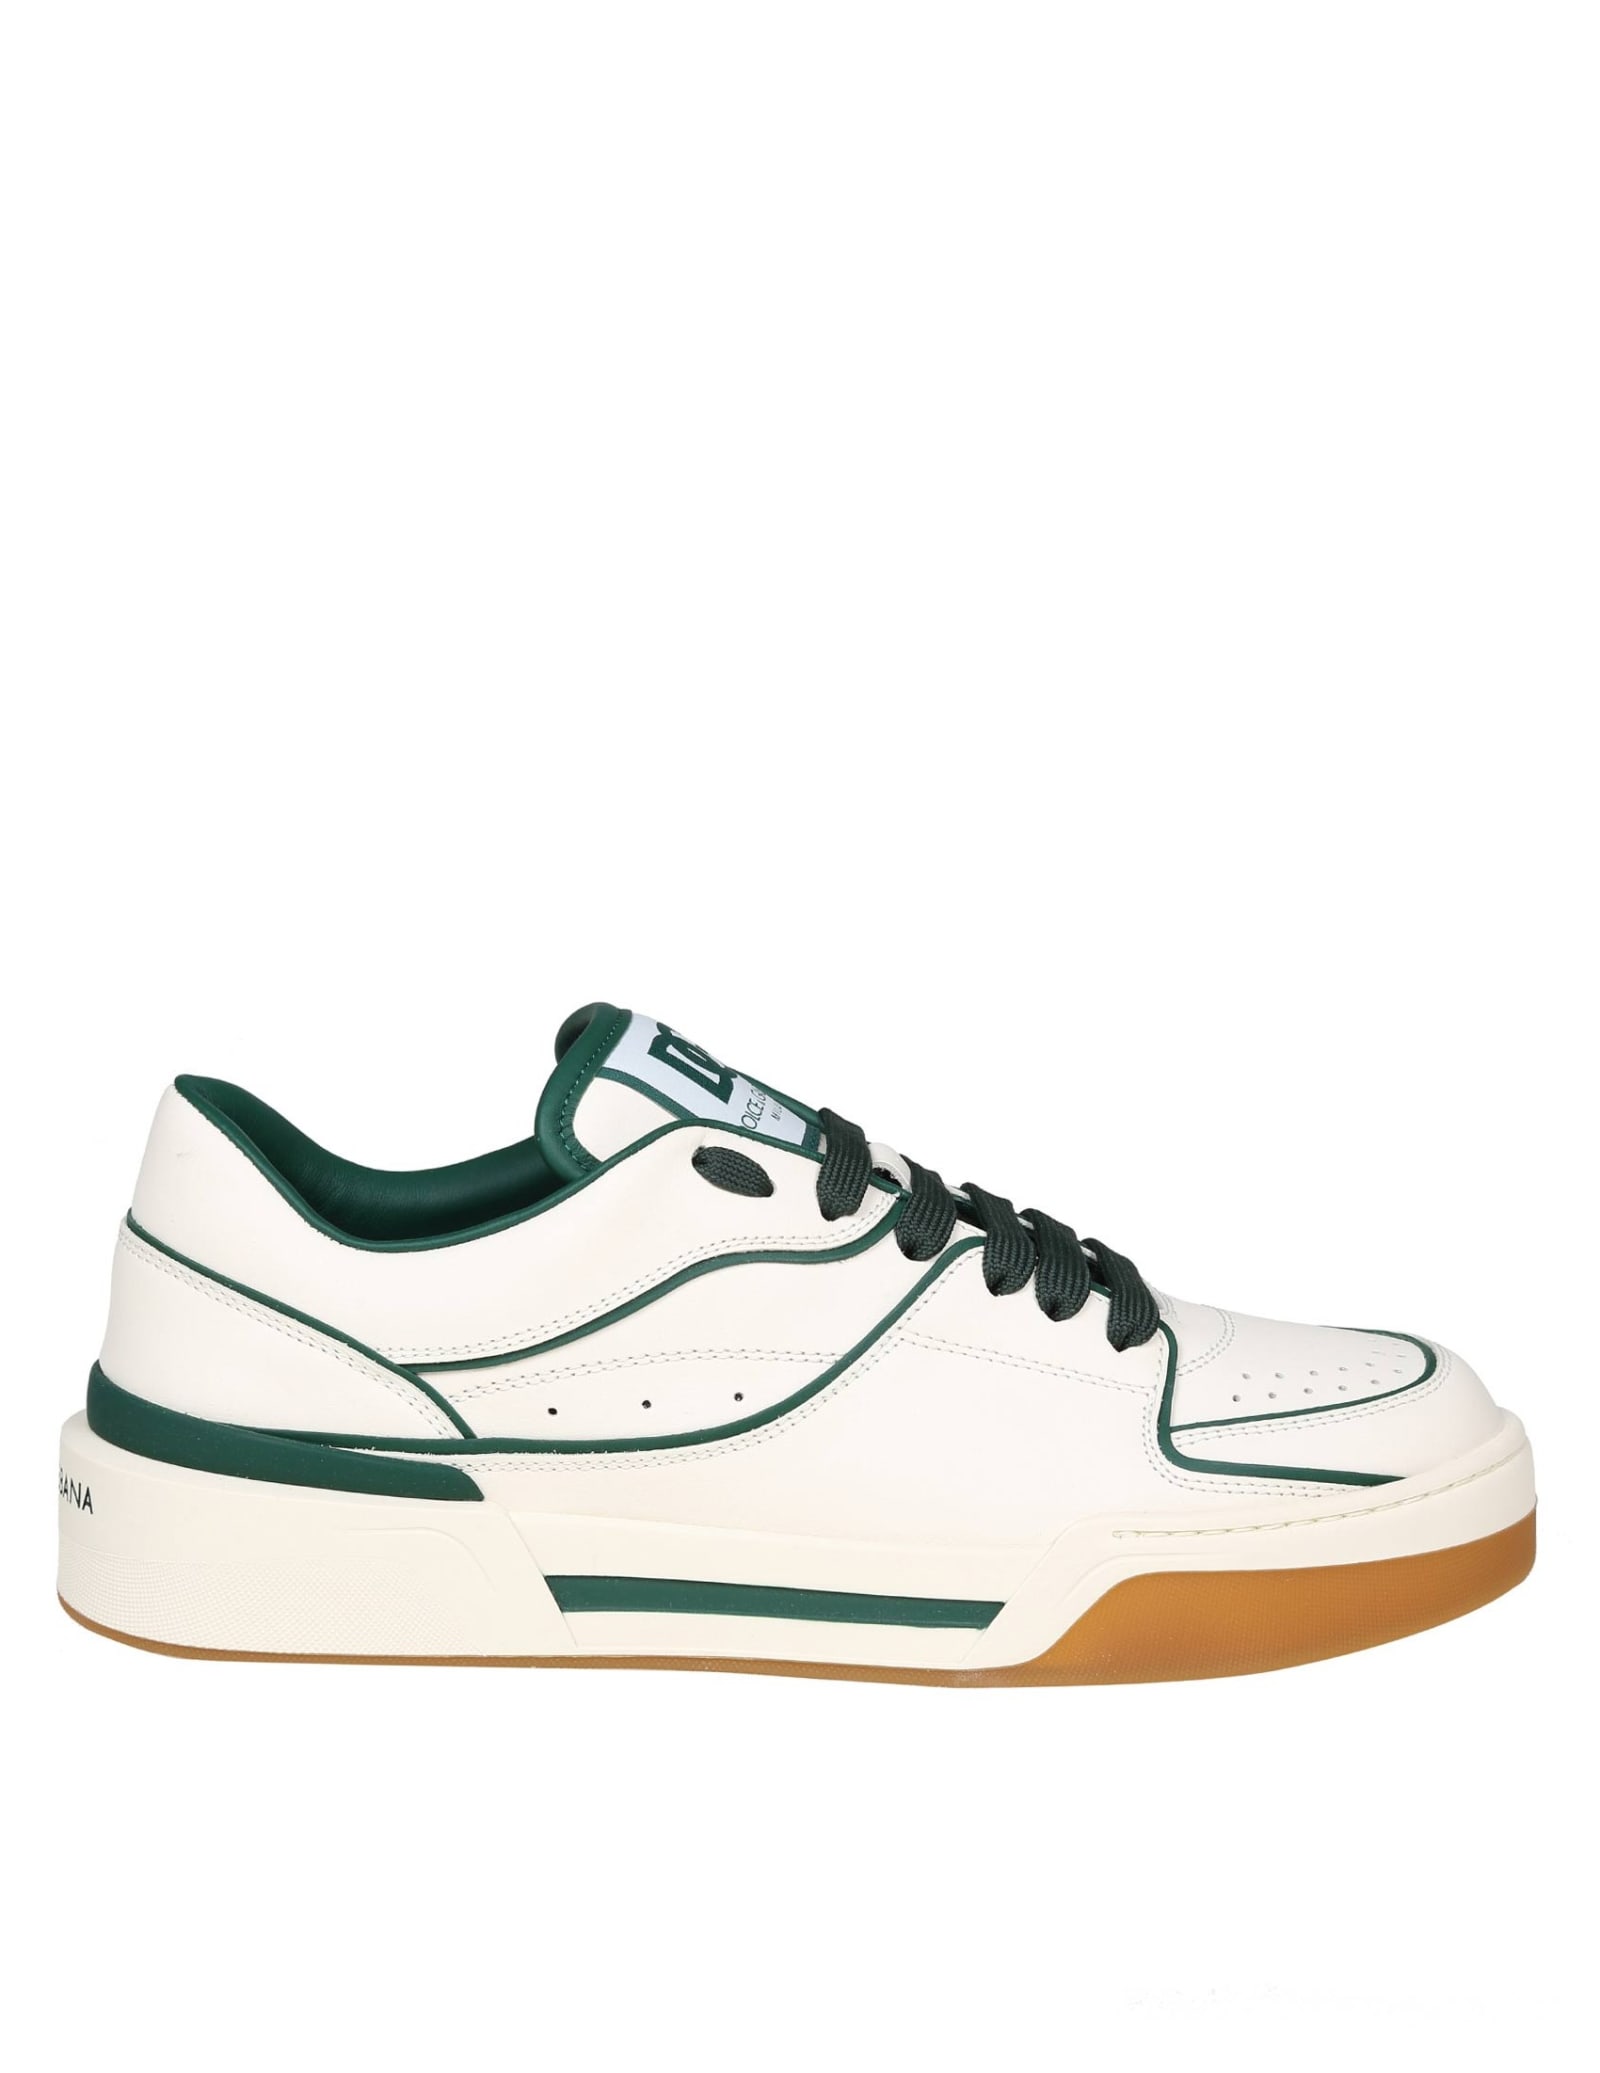 Dolce & Gabbana Sneakers In White And Green Nappa